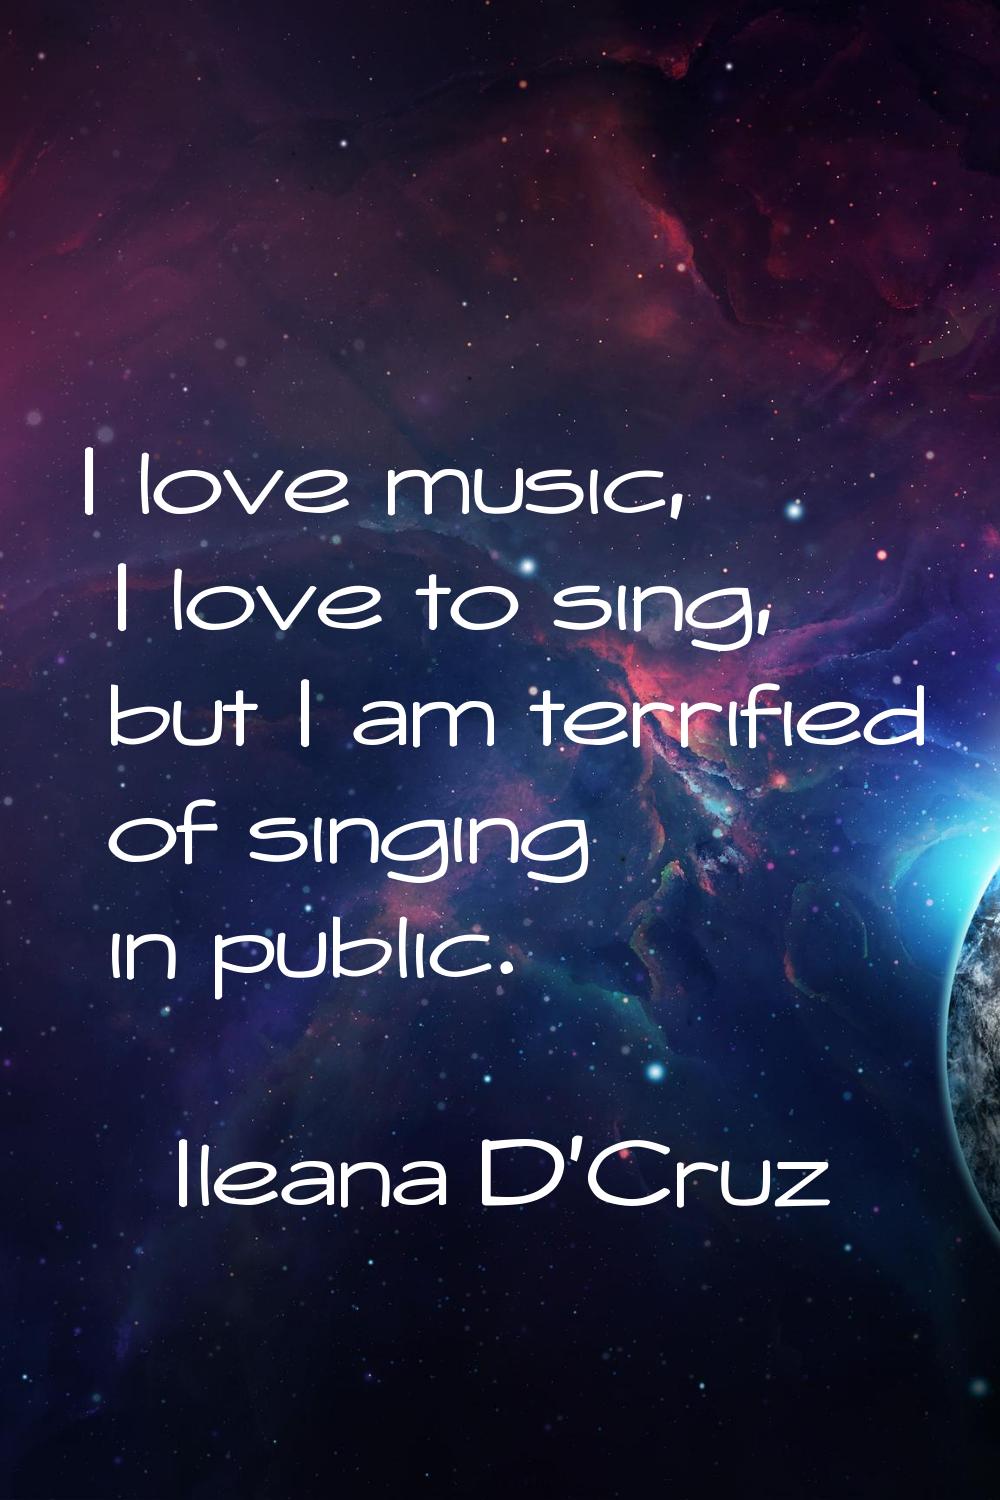 I love music, I love to sing, but I am terrified of singing in public.